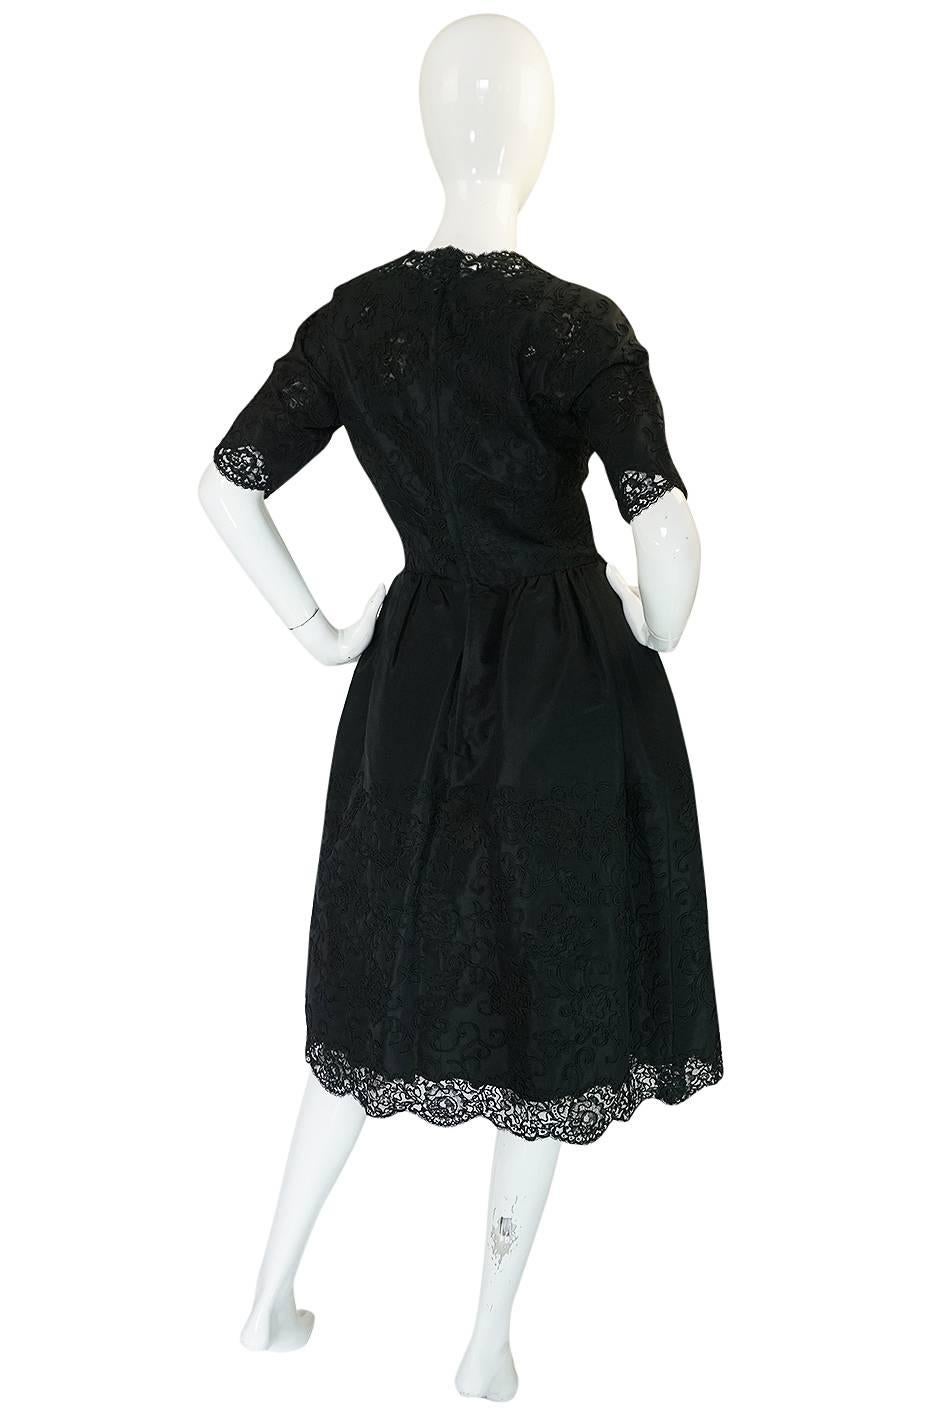 

This wonderful little black dress is from the time period that Sophie Gimbel was designing the Saks in-house ready-to-wear line and her pieces were very expensive. Most of the custom pieces like this one, had extraordinary little details and